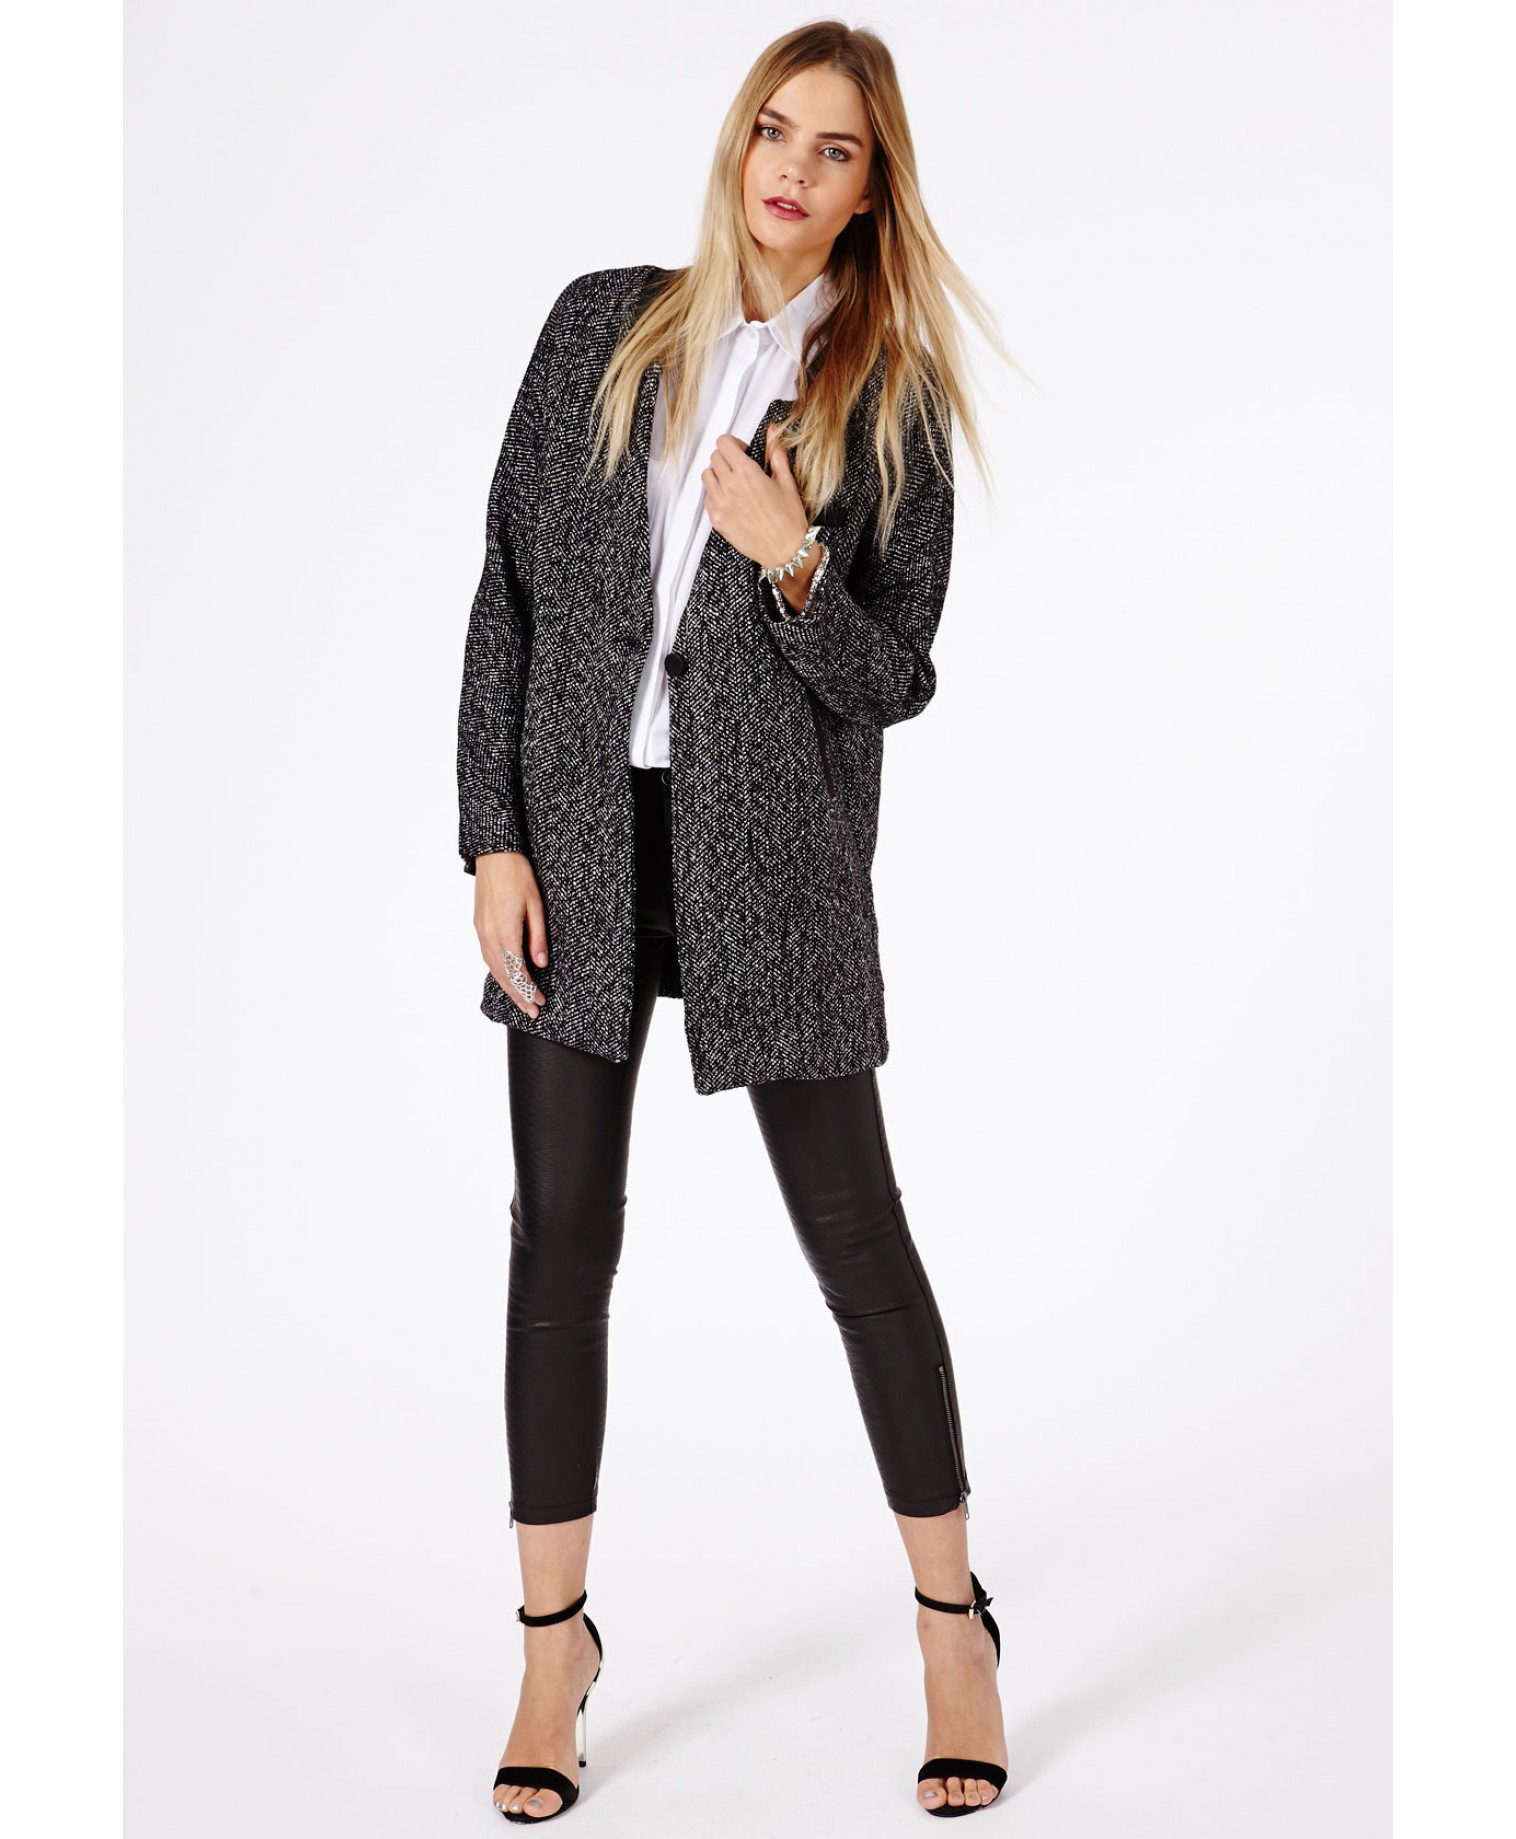 Missguided Petera Tweed Boyfriend Coat with Faux Leather Trim in